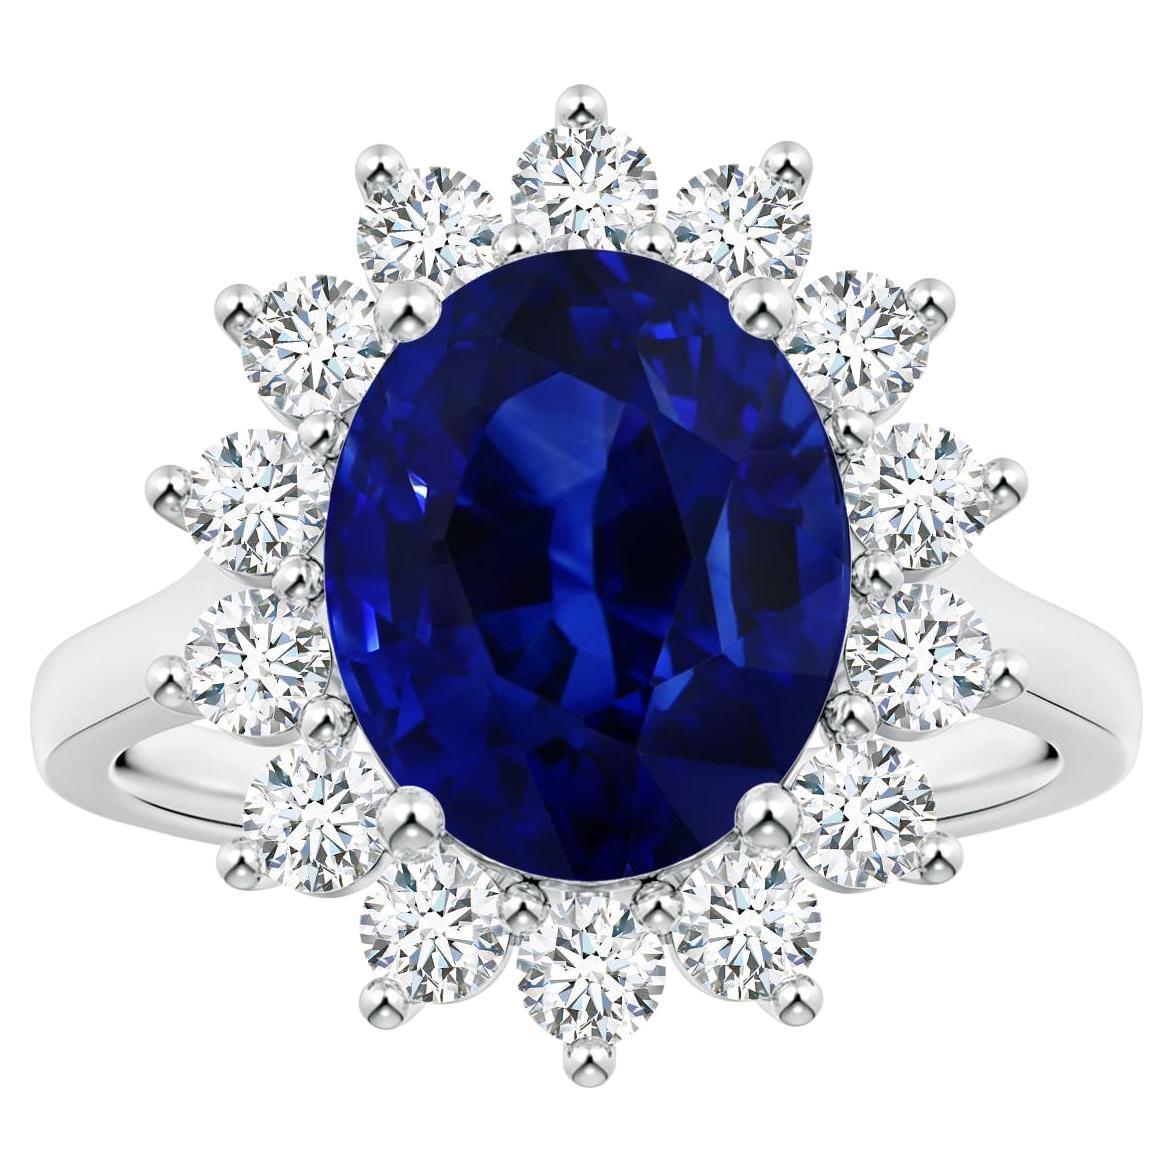 For Sale:  Angara Princess Diana Inspired Gia Certified Blue Sapphire Halo Ring in Platinum